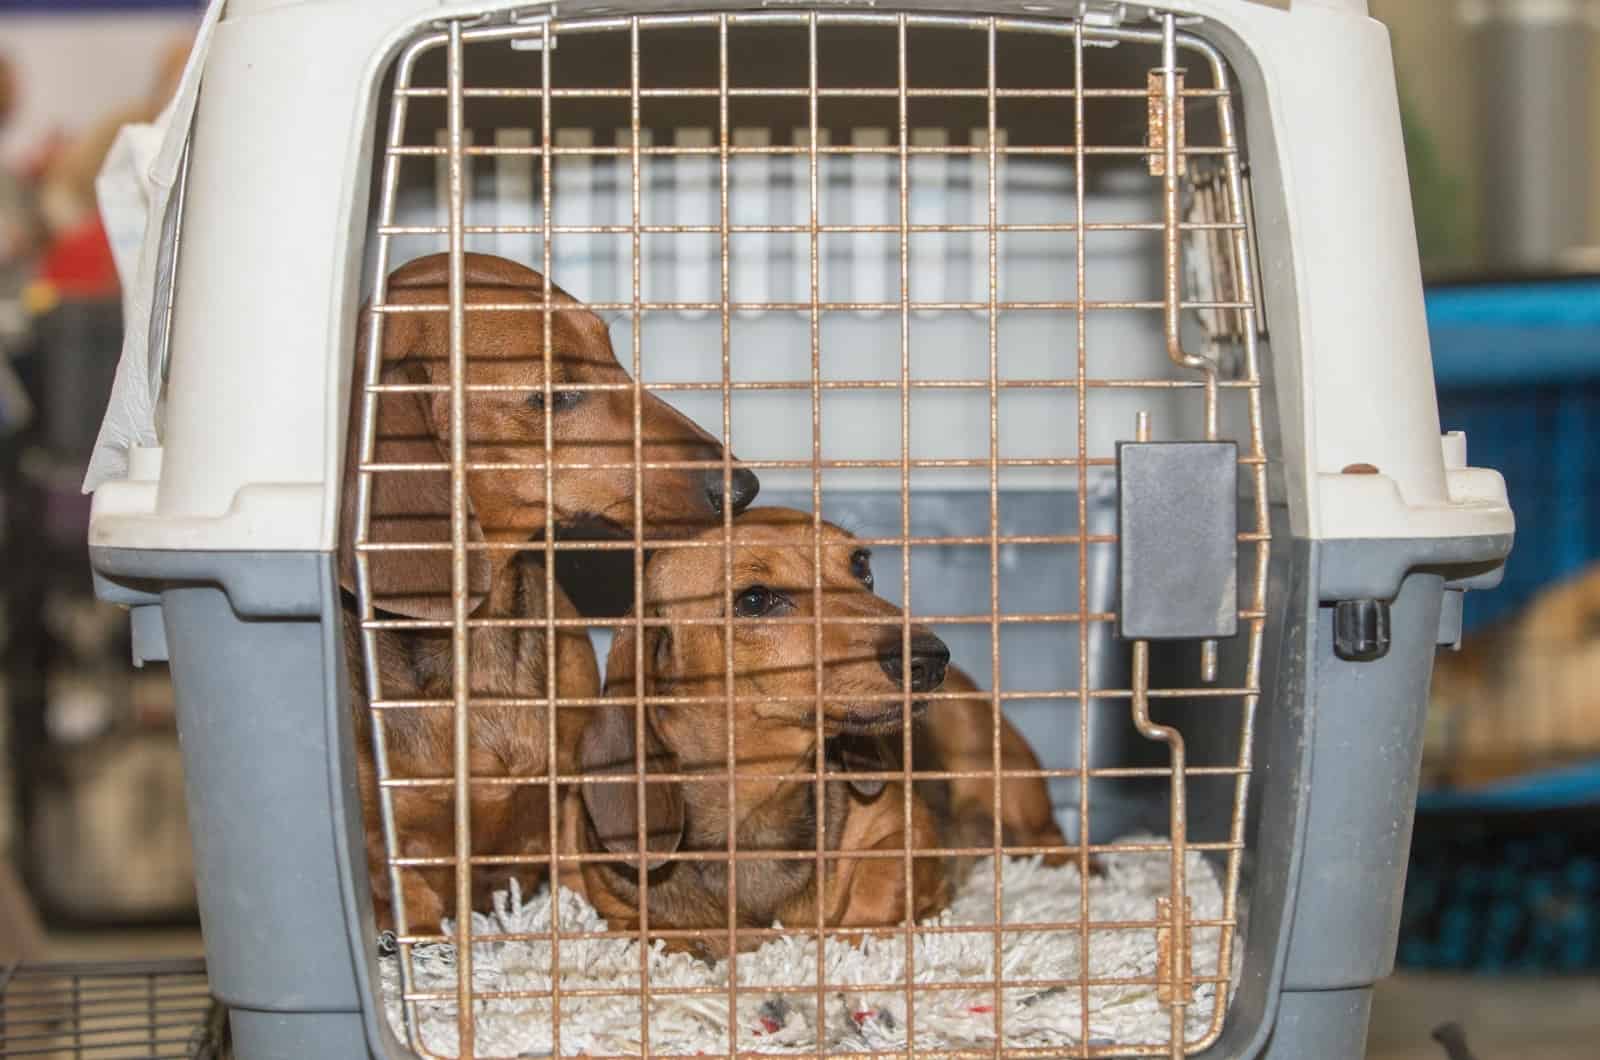 Dachshunds in crate